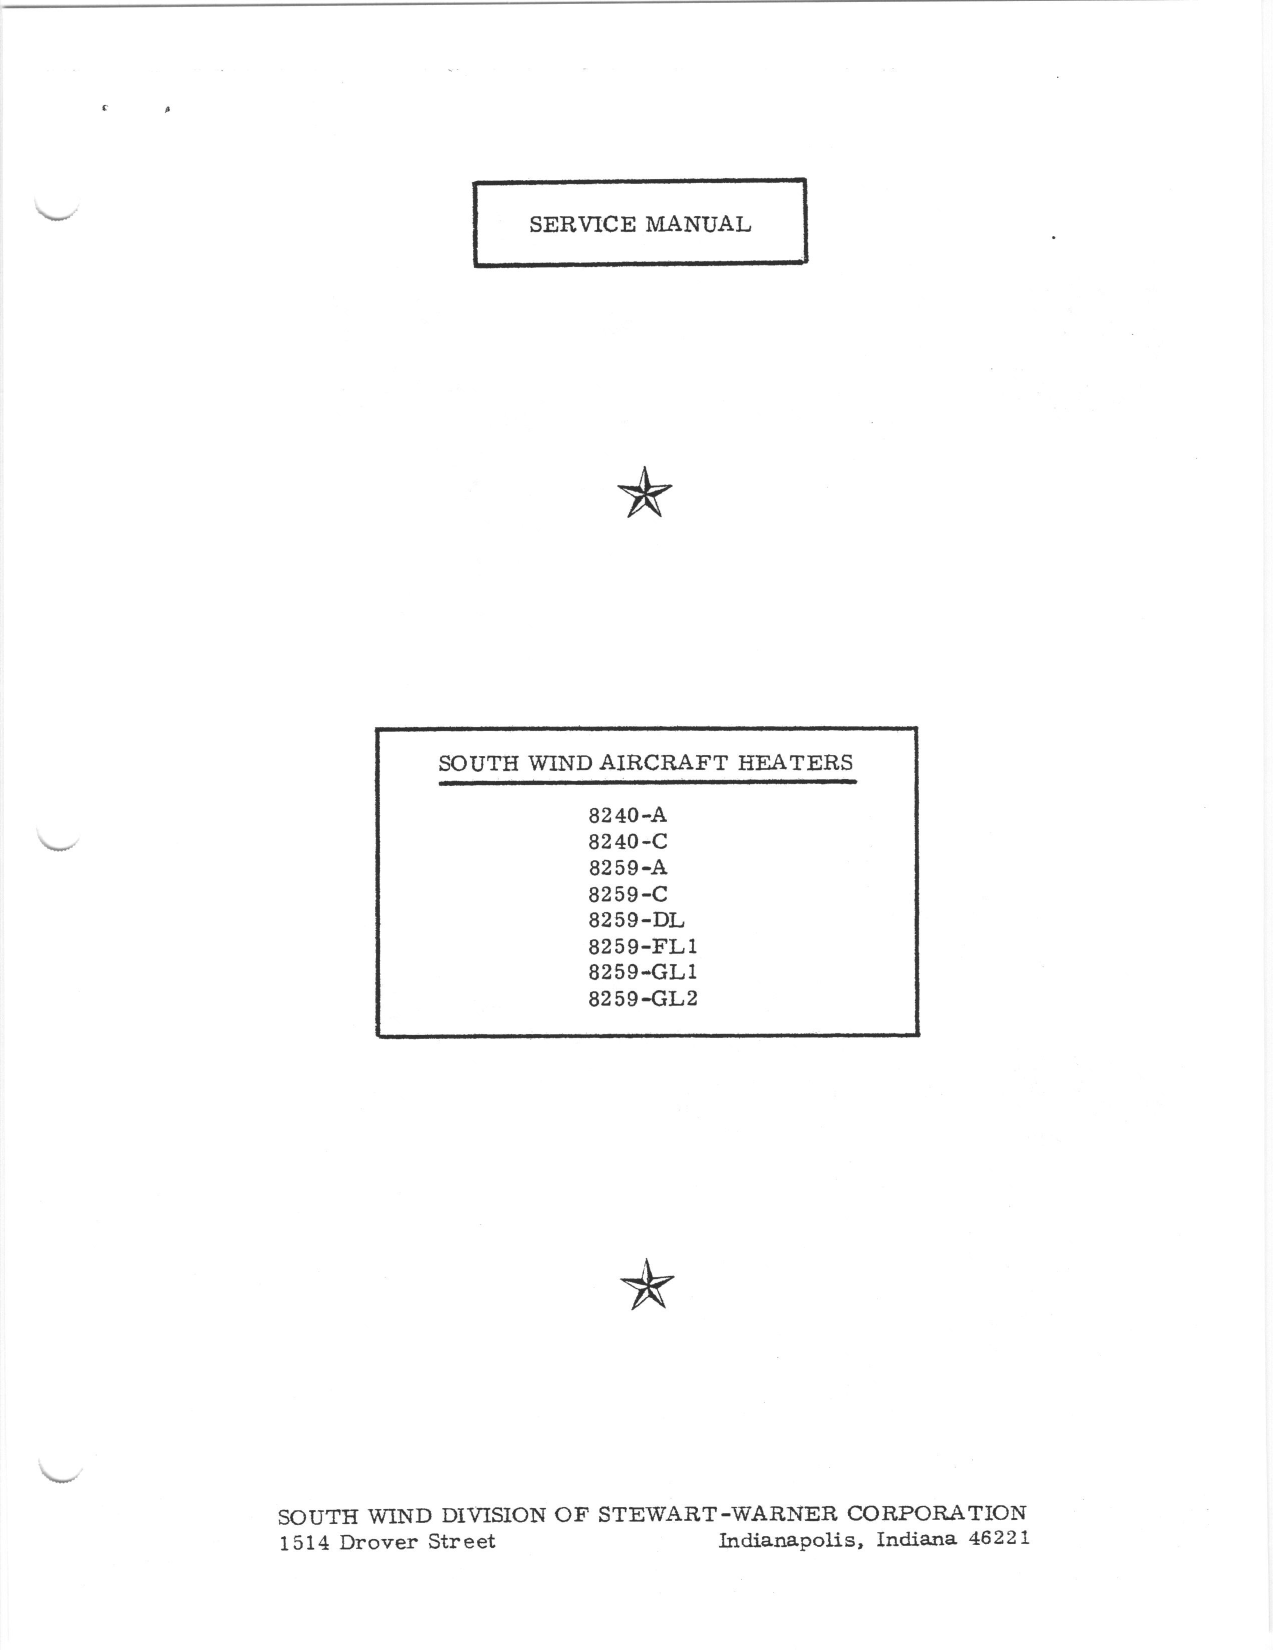 Sample page 3 from AirCorps Library document: Service Manual for South Wind Aircraft Heaters